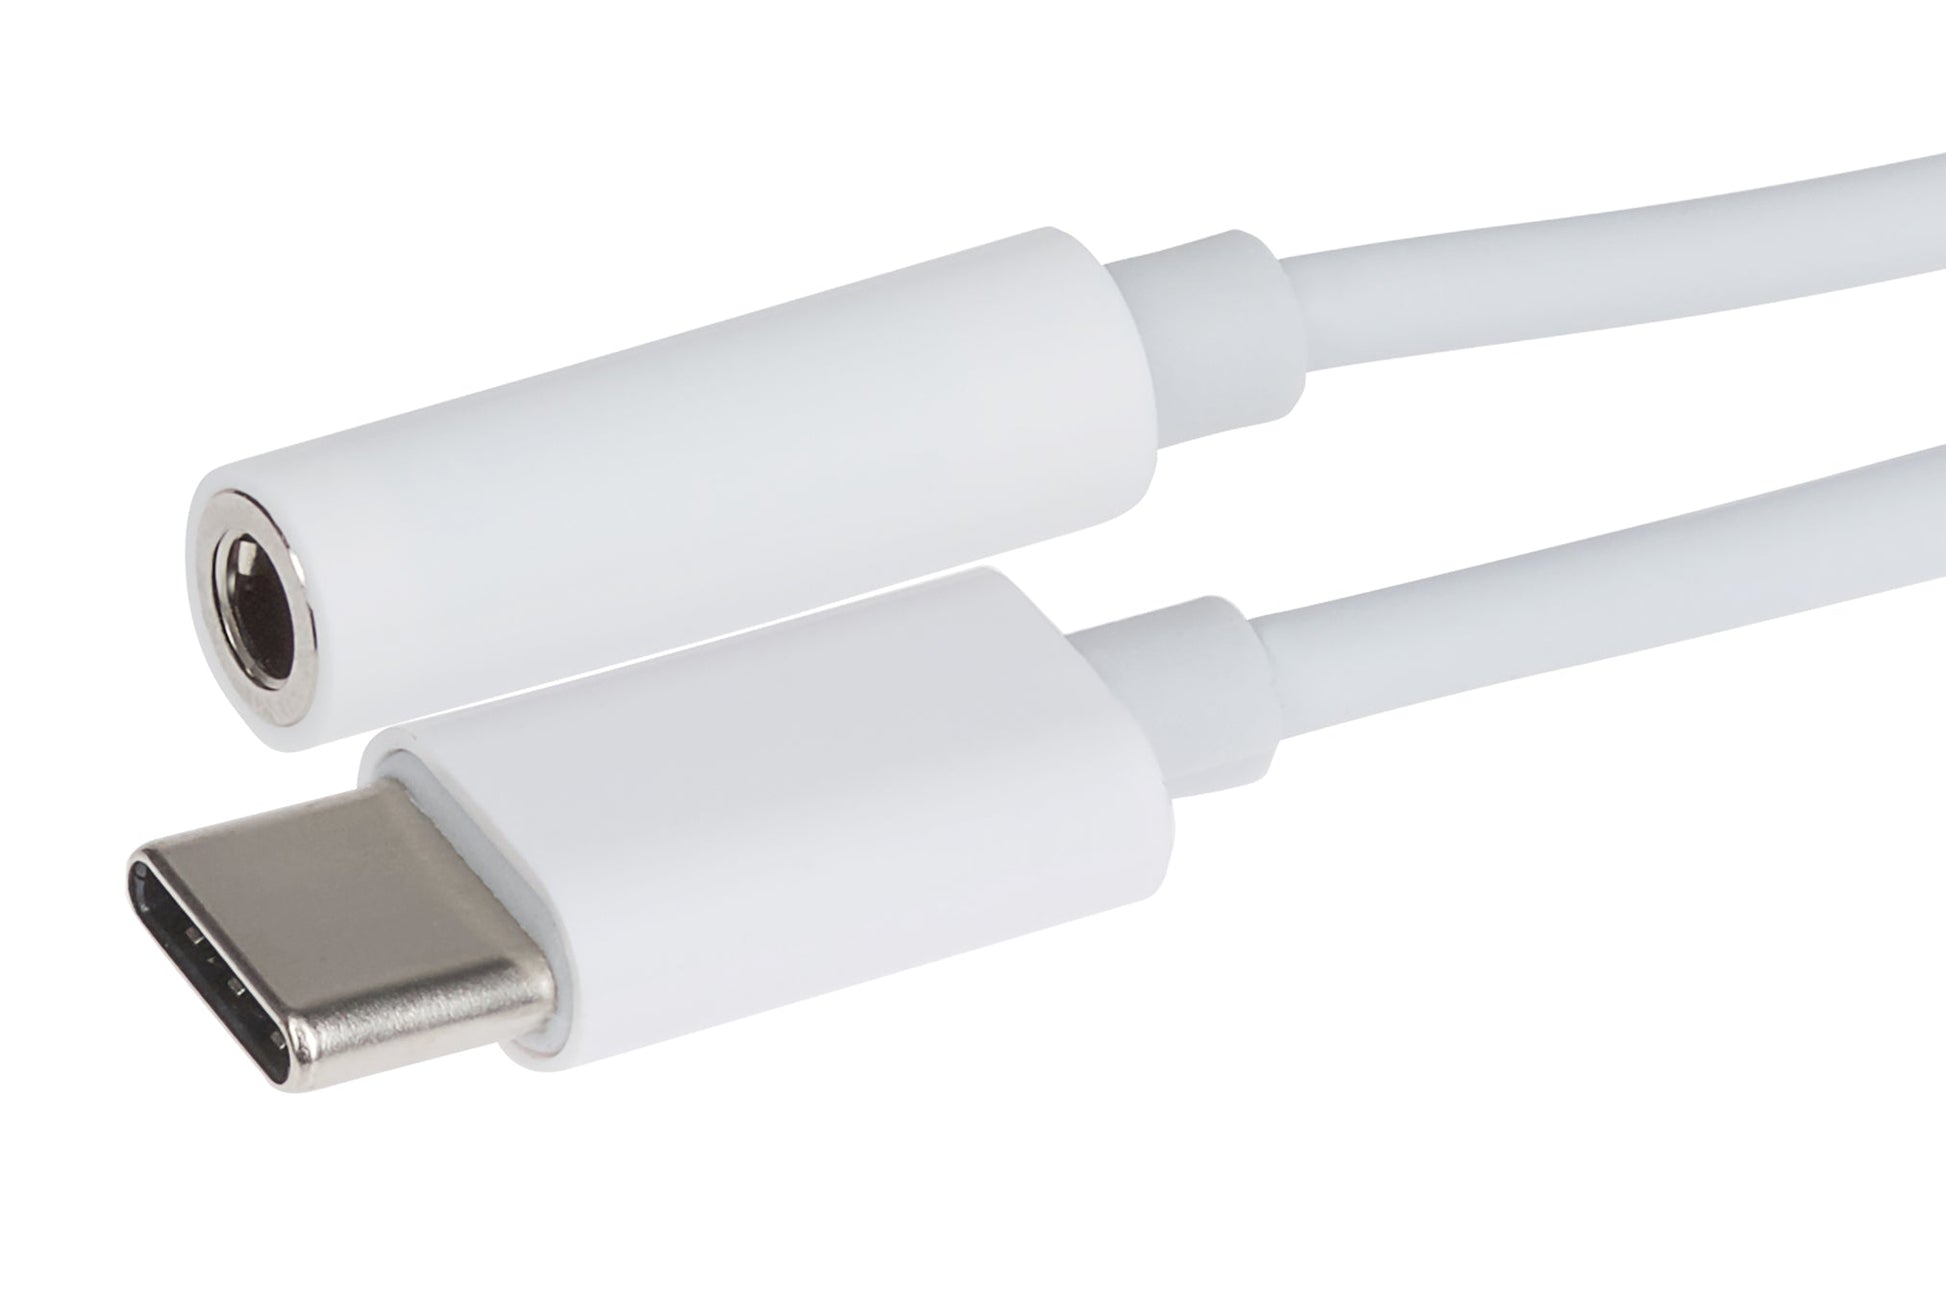 Nikkai USB-C to 3.5mm Headphone Jack Adapter - White, Chargers & Adapters, Maplin